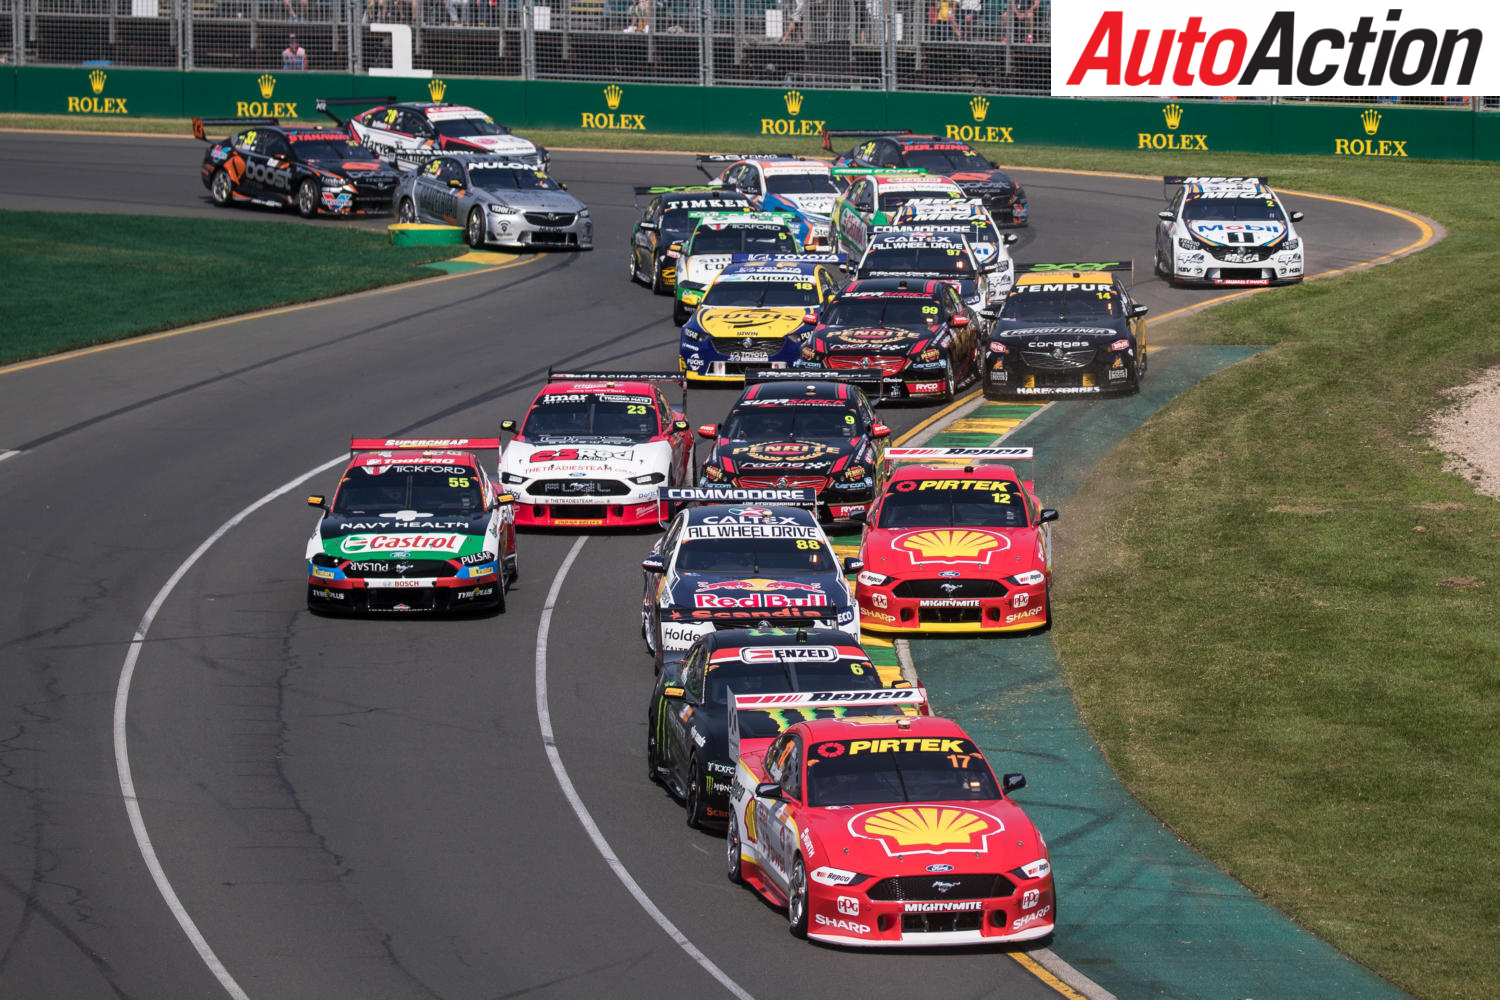 Australian Grand Prix working to keep Supercars - Image: InSyde Media